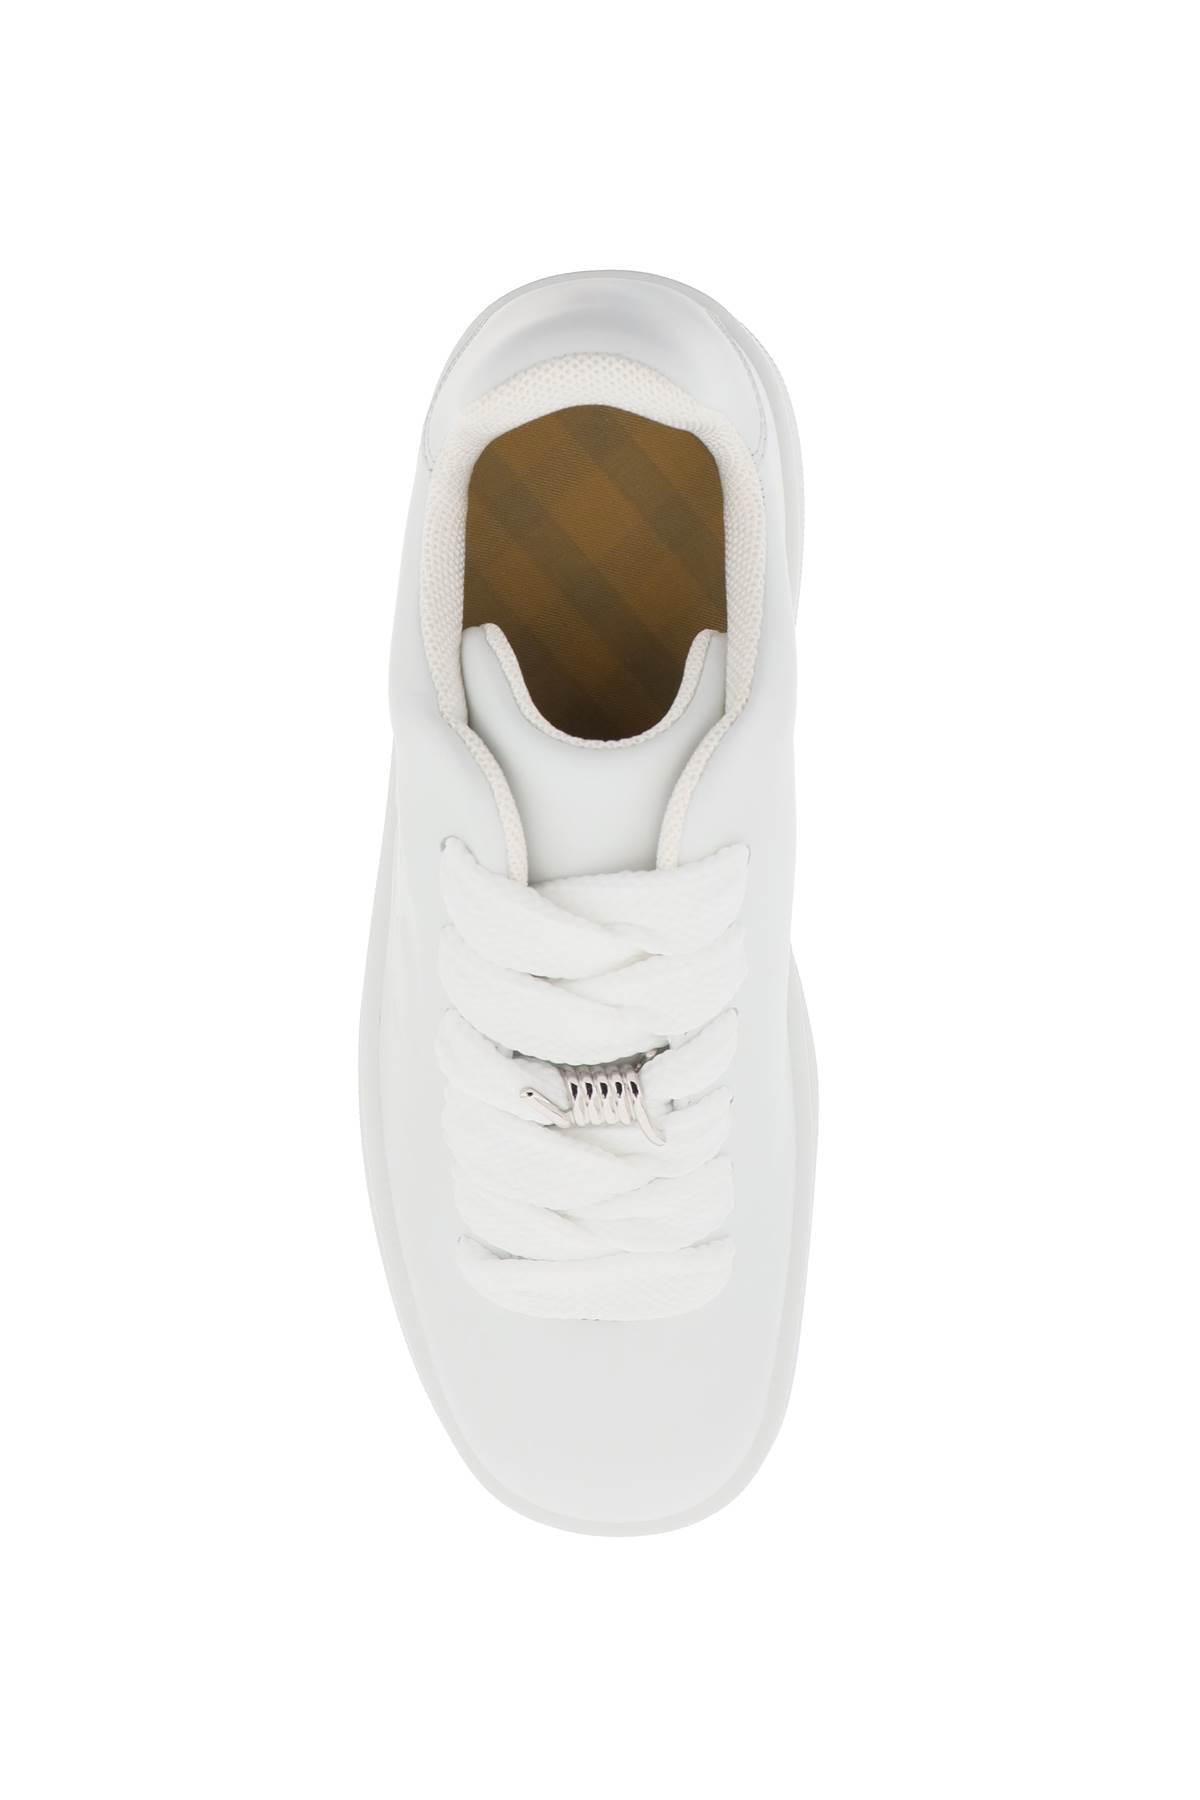 Burberry Storage Box Leather Sneakers White